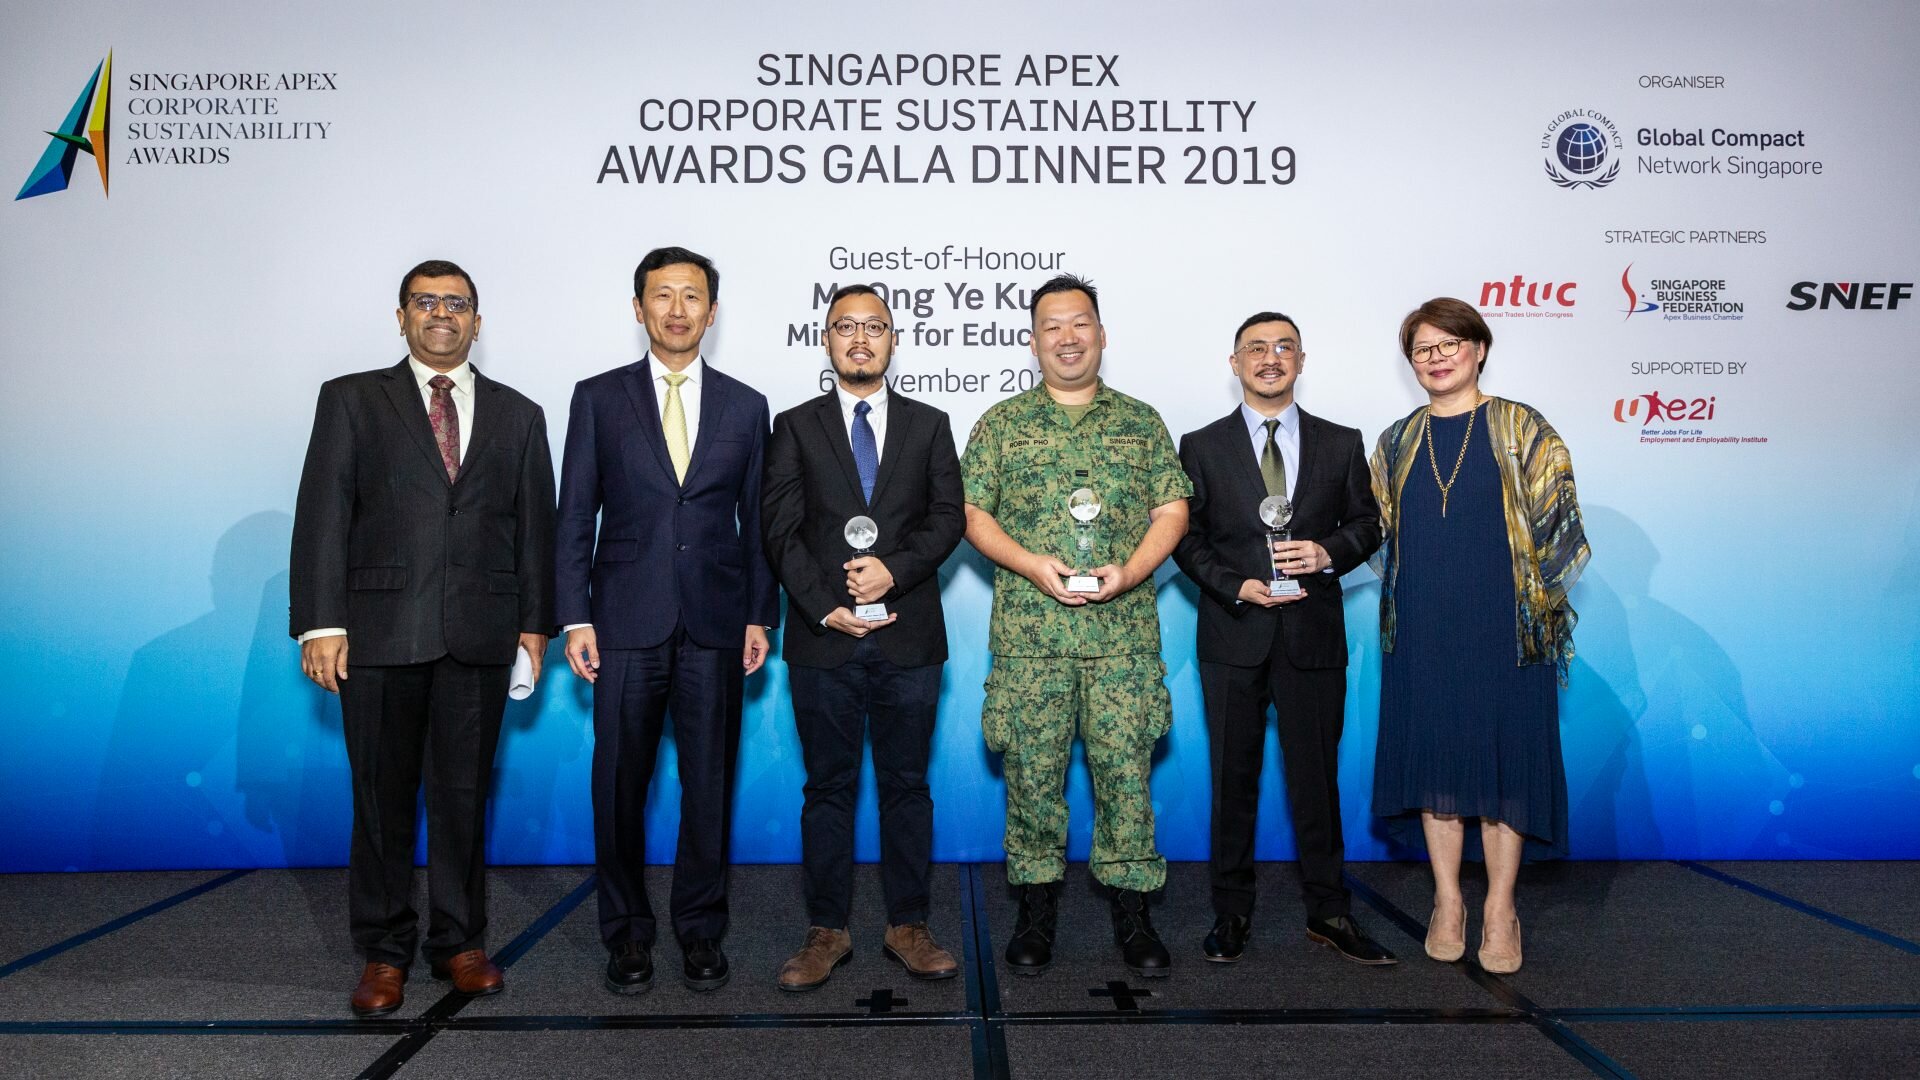 Getting The Green Light At The Singapore Apex Corporate Sustainability Awards Gala Dinner 2019